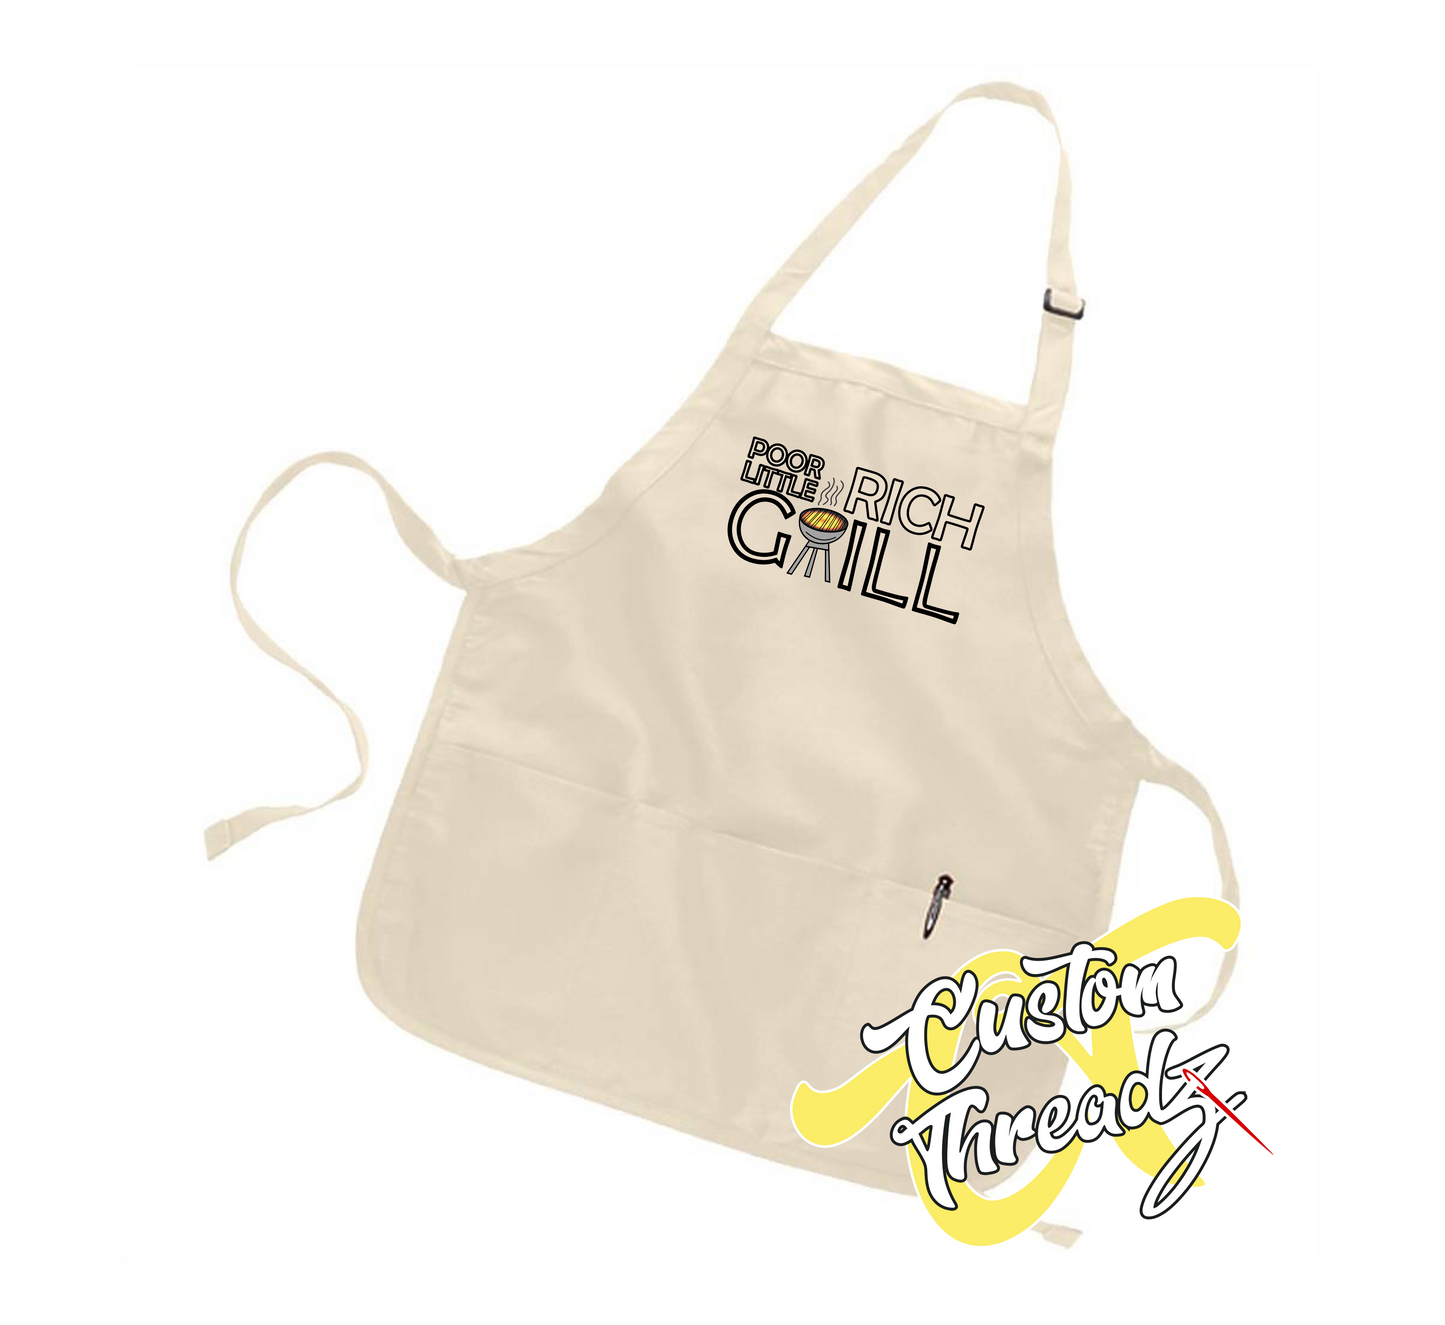 stone apron with poor little rich grill schitts creek DTG printed design